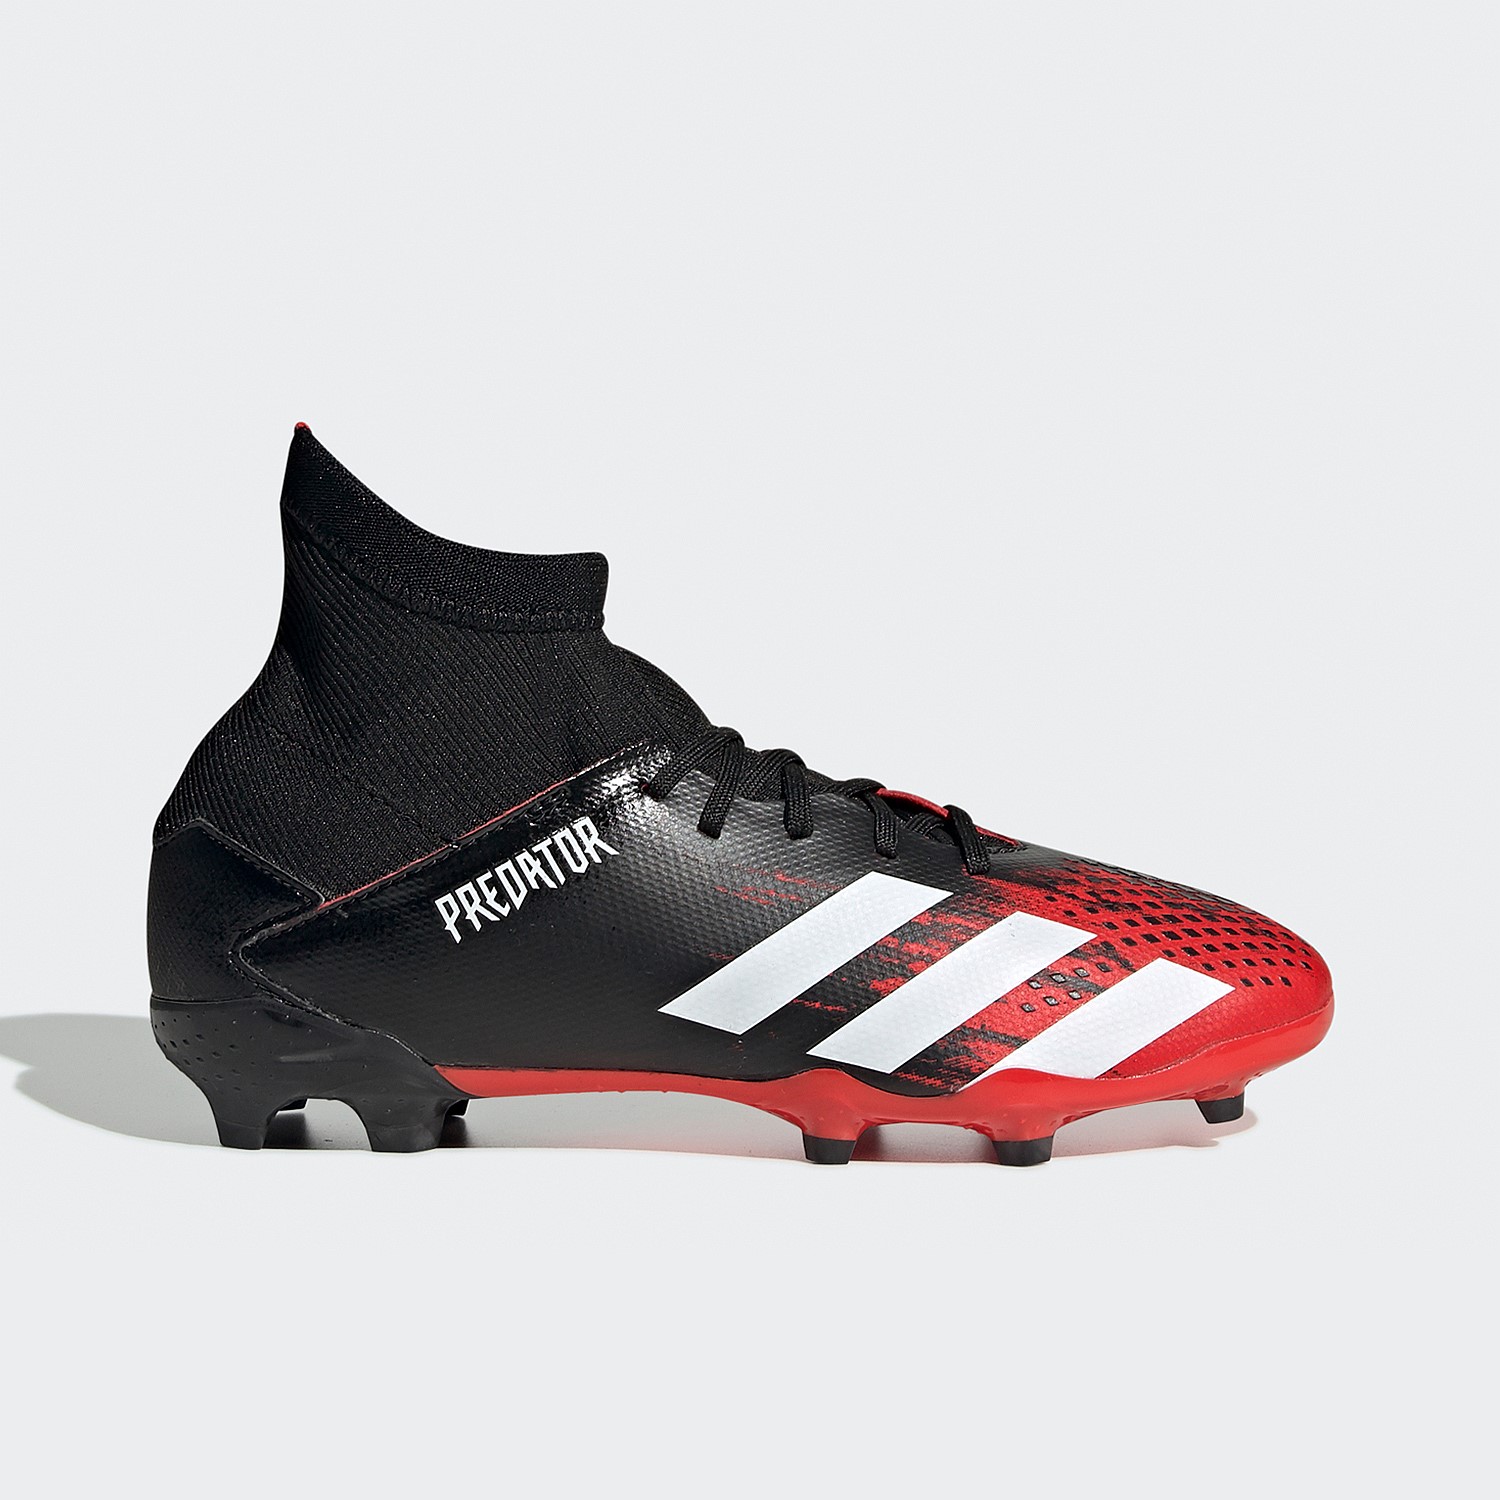 Football | Football Supporter Gear, Footwear and Accessories Online |  Stirling Sports - Predator 20.3 Firm-Ground Football Boots Kids